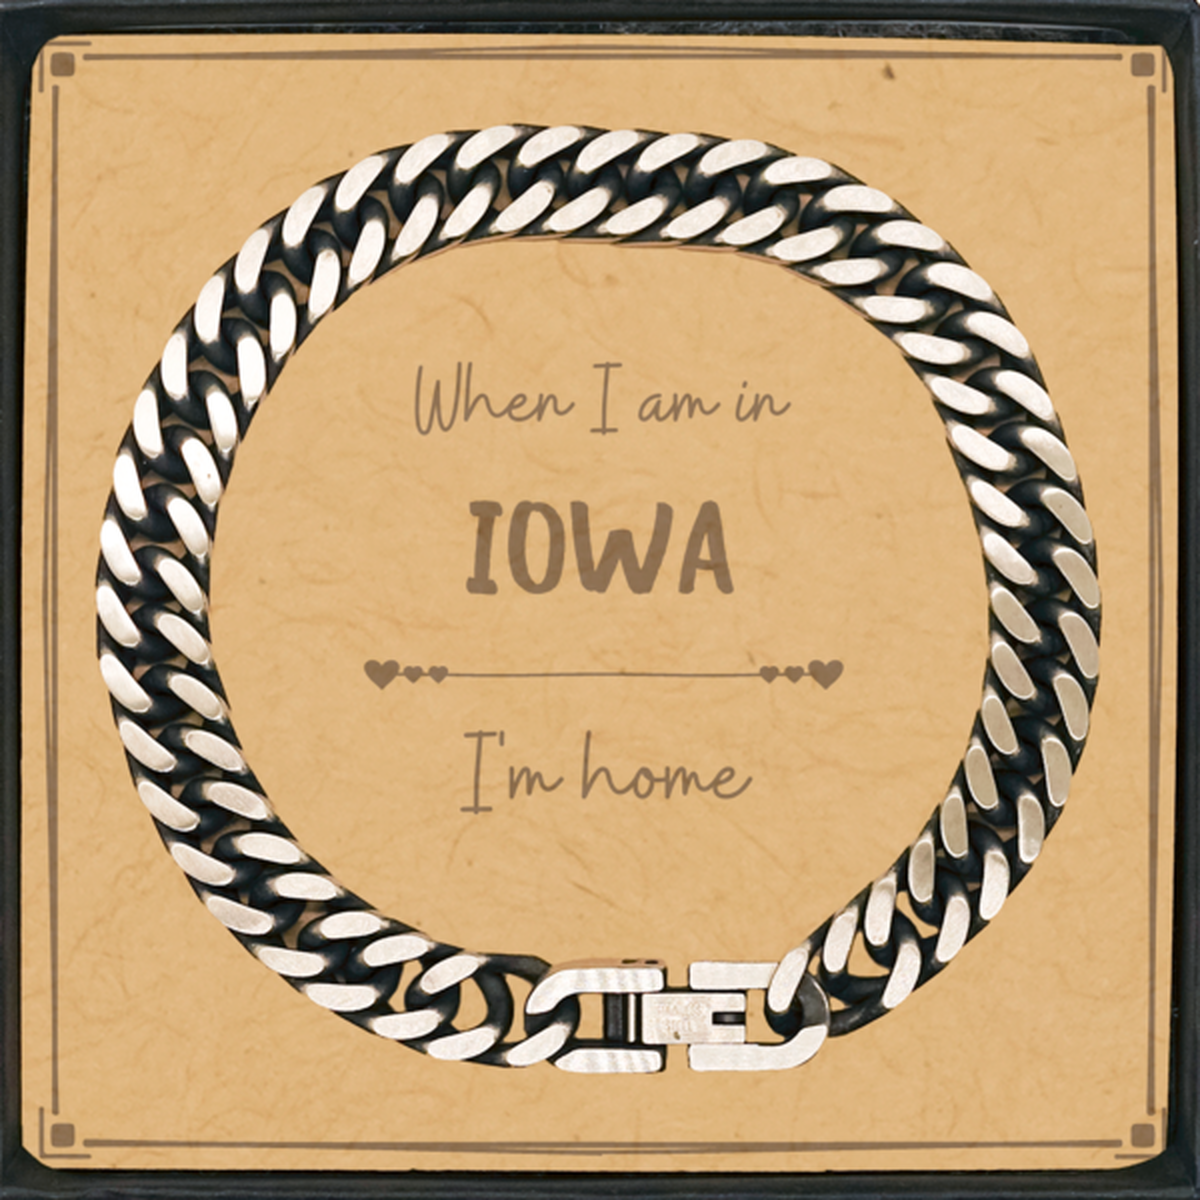 When I am in Iowa I'm home Cuban Link Chain Bracelet, Message Card Gifts For Iowa, State Iowa Birthday Gifts for Friends Coworker